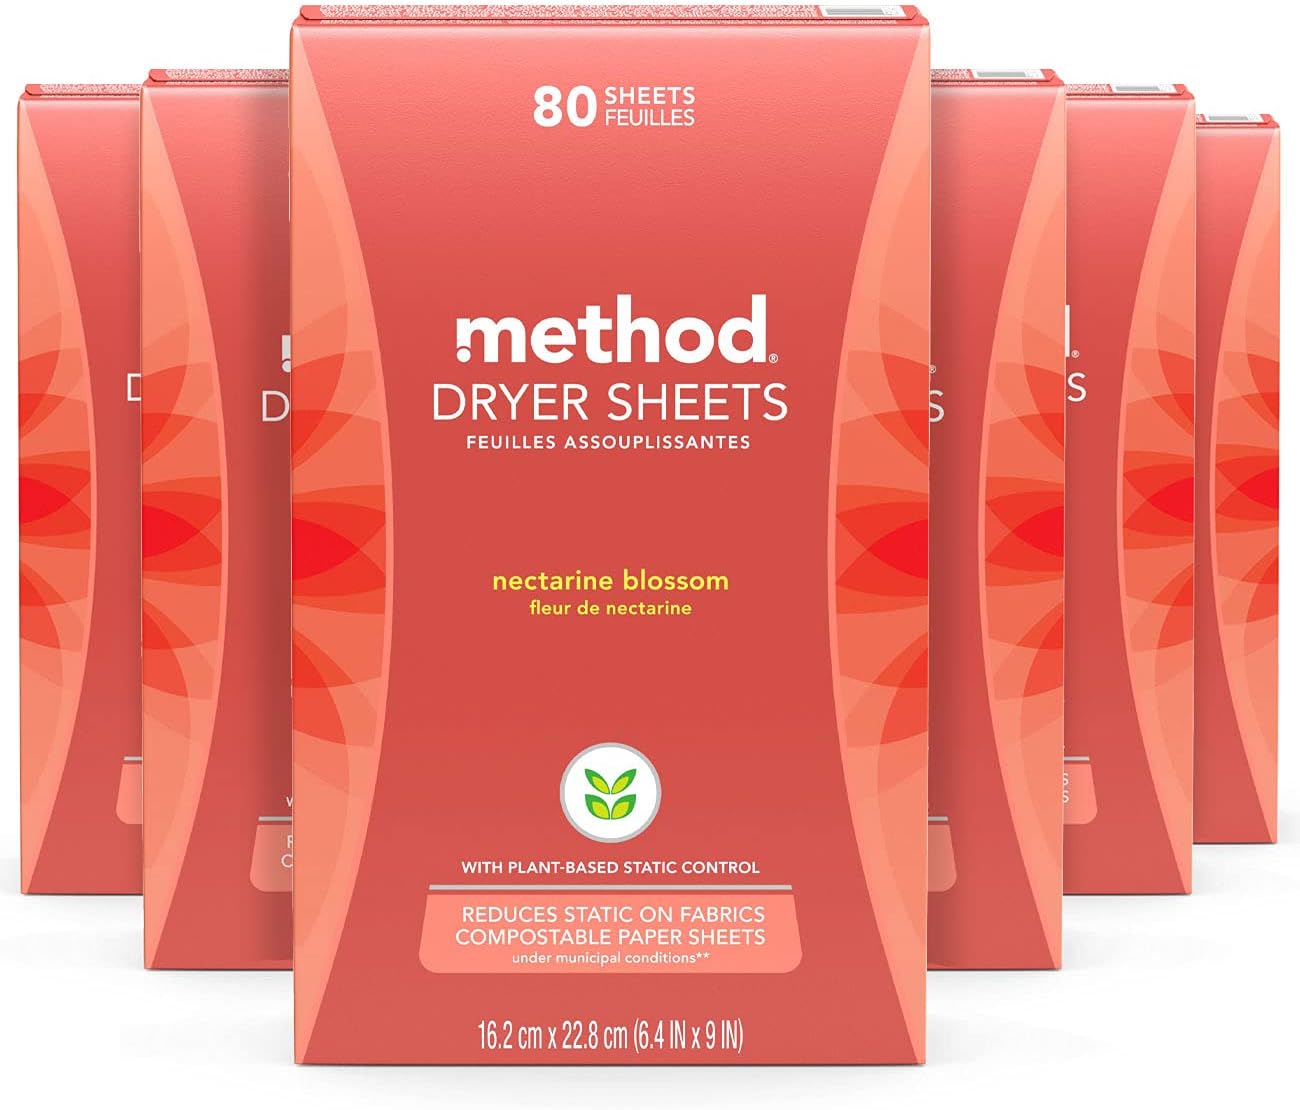 Method Dryer Sheets, Nectarine Blossom, Fabric Softener and Static Reducer, Compostable and Plant-Based Laundry Essentials, 80 Count (Pack of 6)